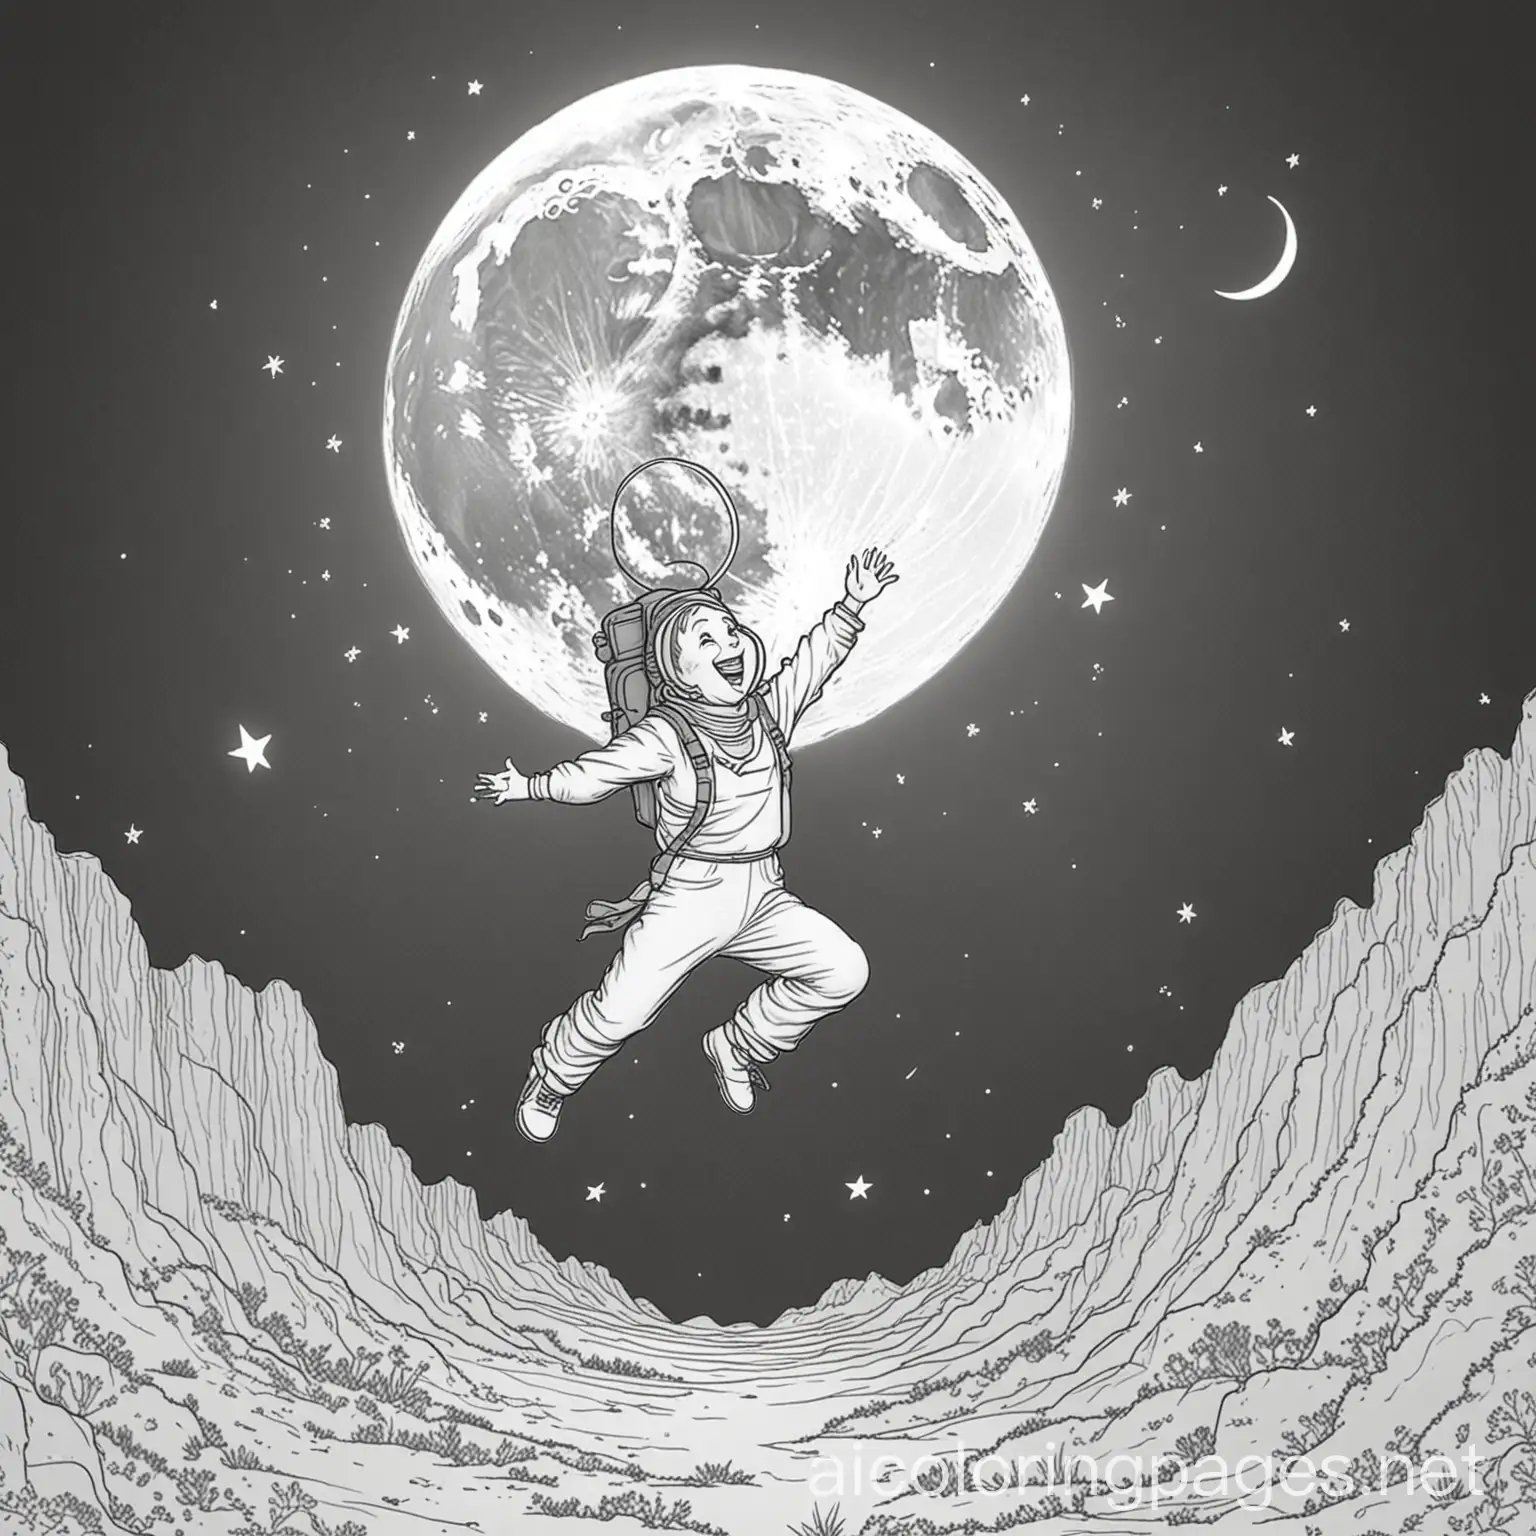 jumping to the moon, Coloring Page, black and white, line art, white background, Simplicity, Ample White Space. The background of the coloring page is plain white to make it easy for young children to color within the lines. The outlines of all the subjects are easy to distinguish, making it simple for kids to color without too much difficulty